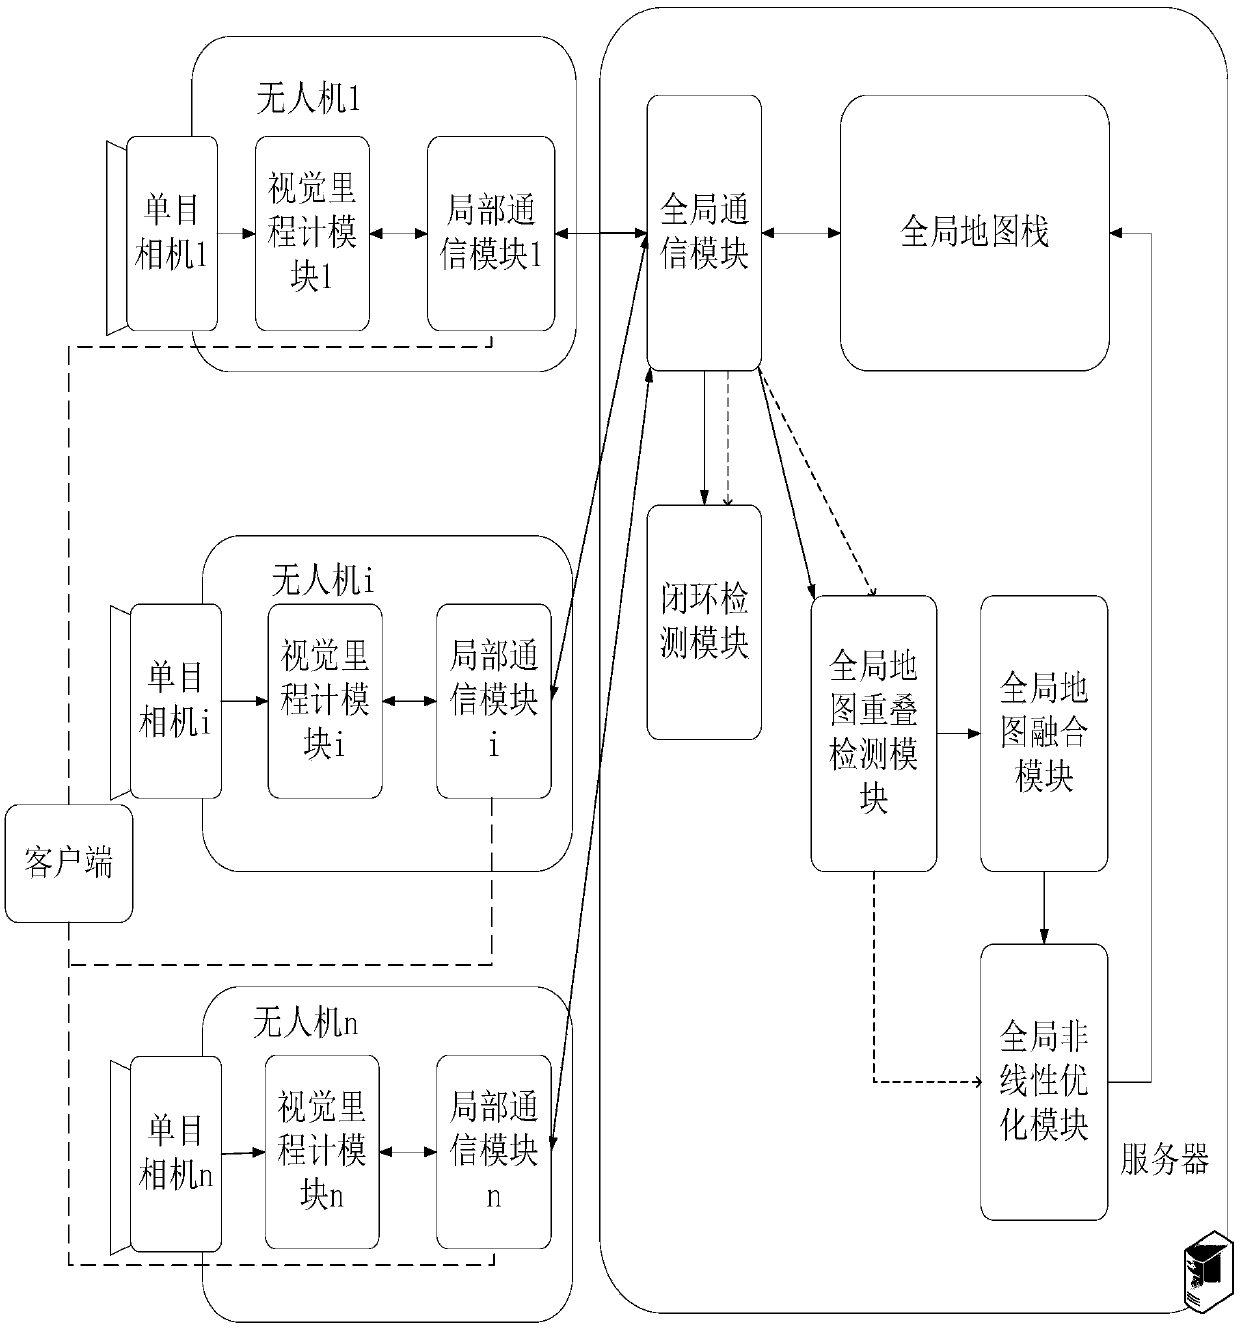 A multi-UAV (Unmanned Aerial Vehicle) collaborative map construction method oriented to data sharing